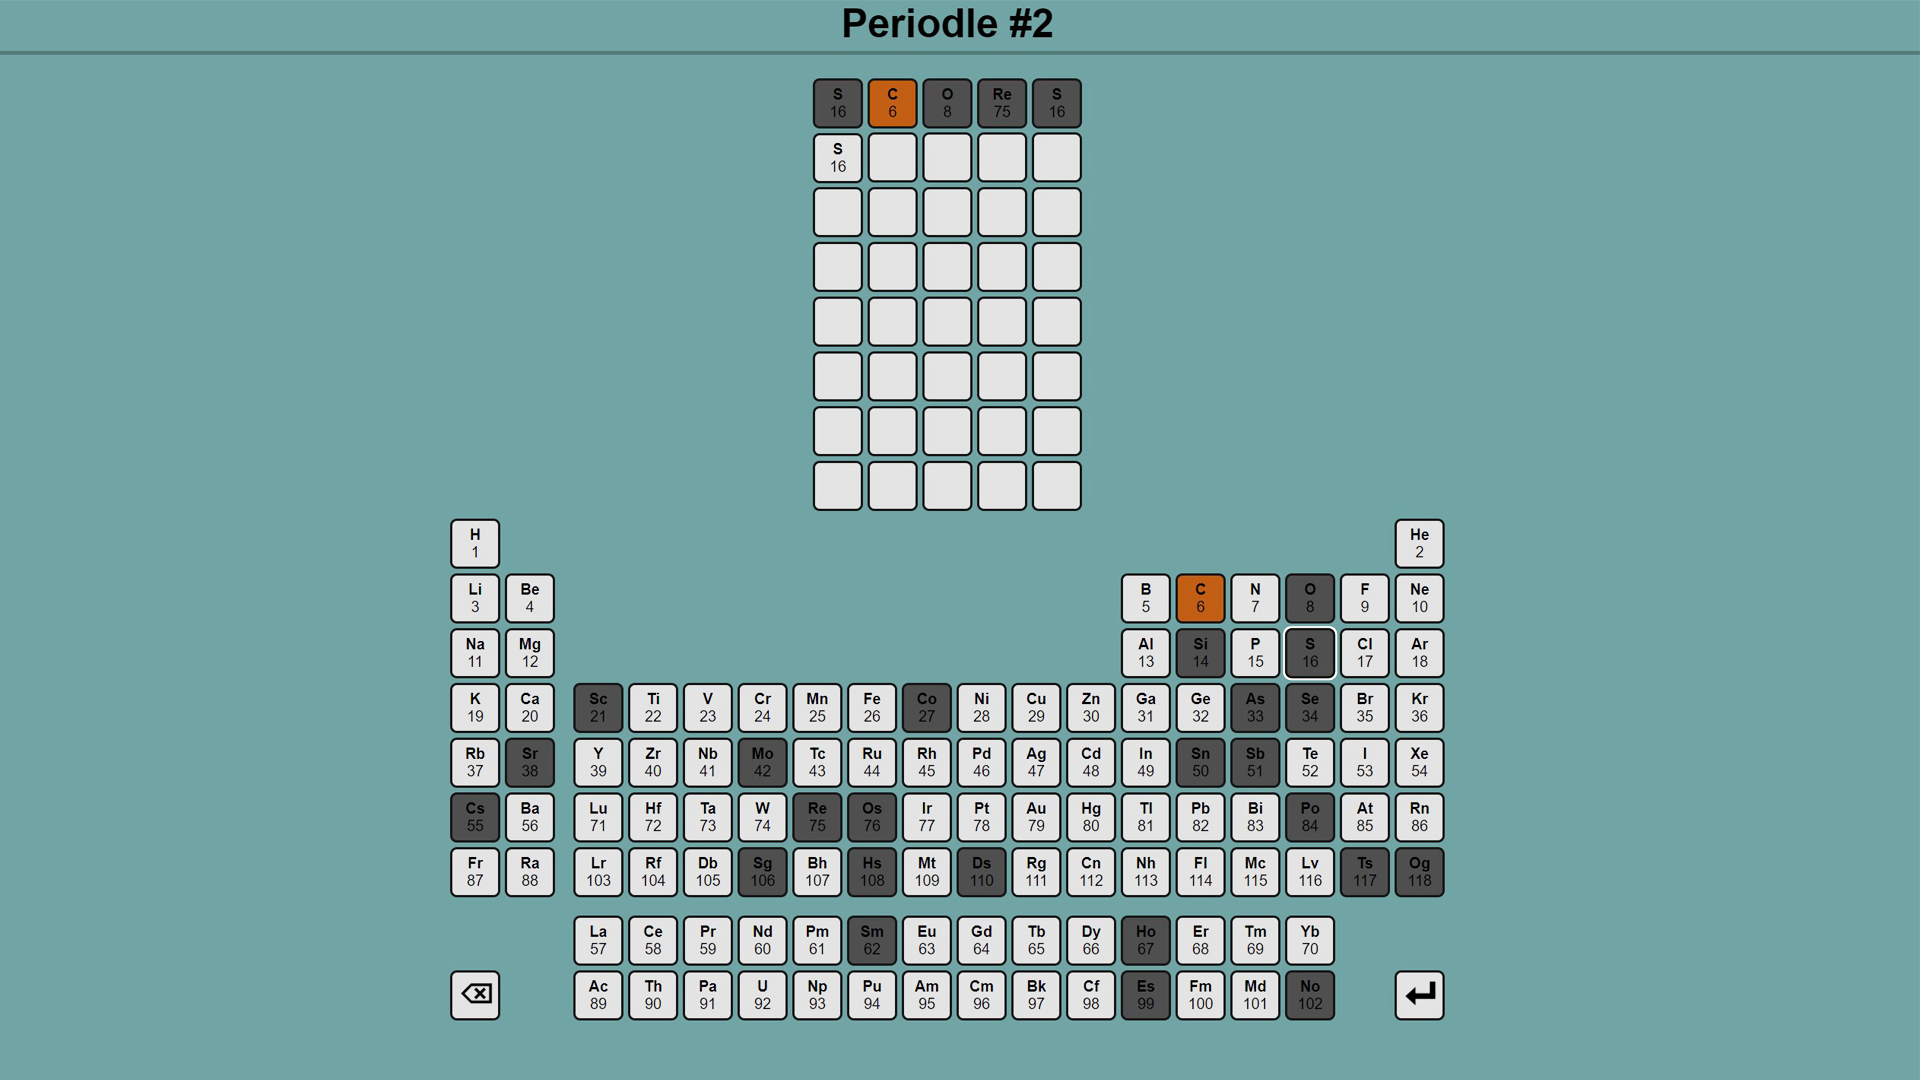 A "Periodle" puzzle showing some correct and incorrect guesses